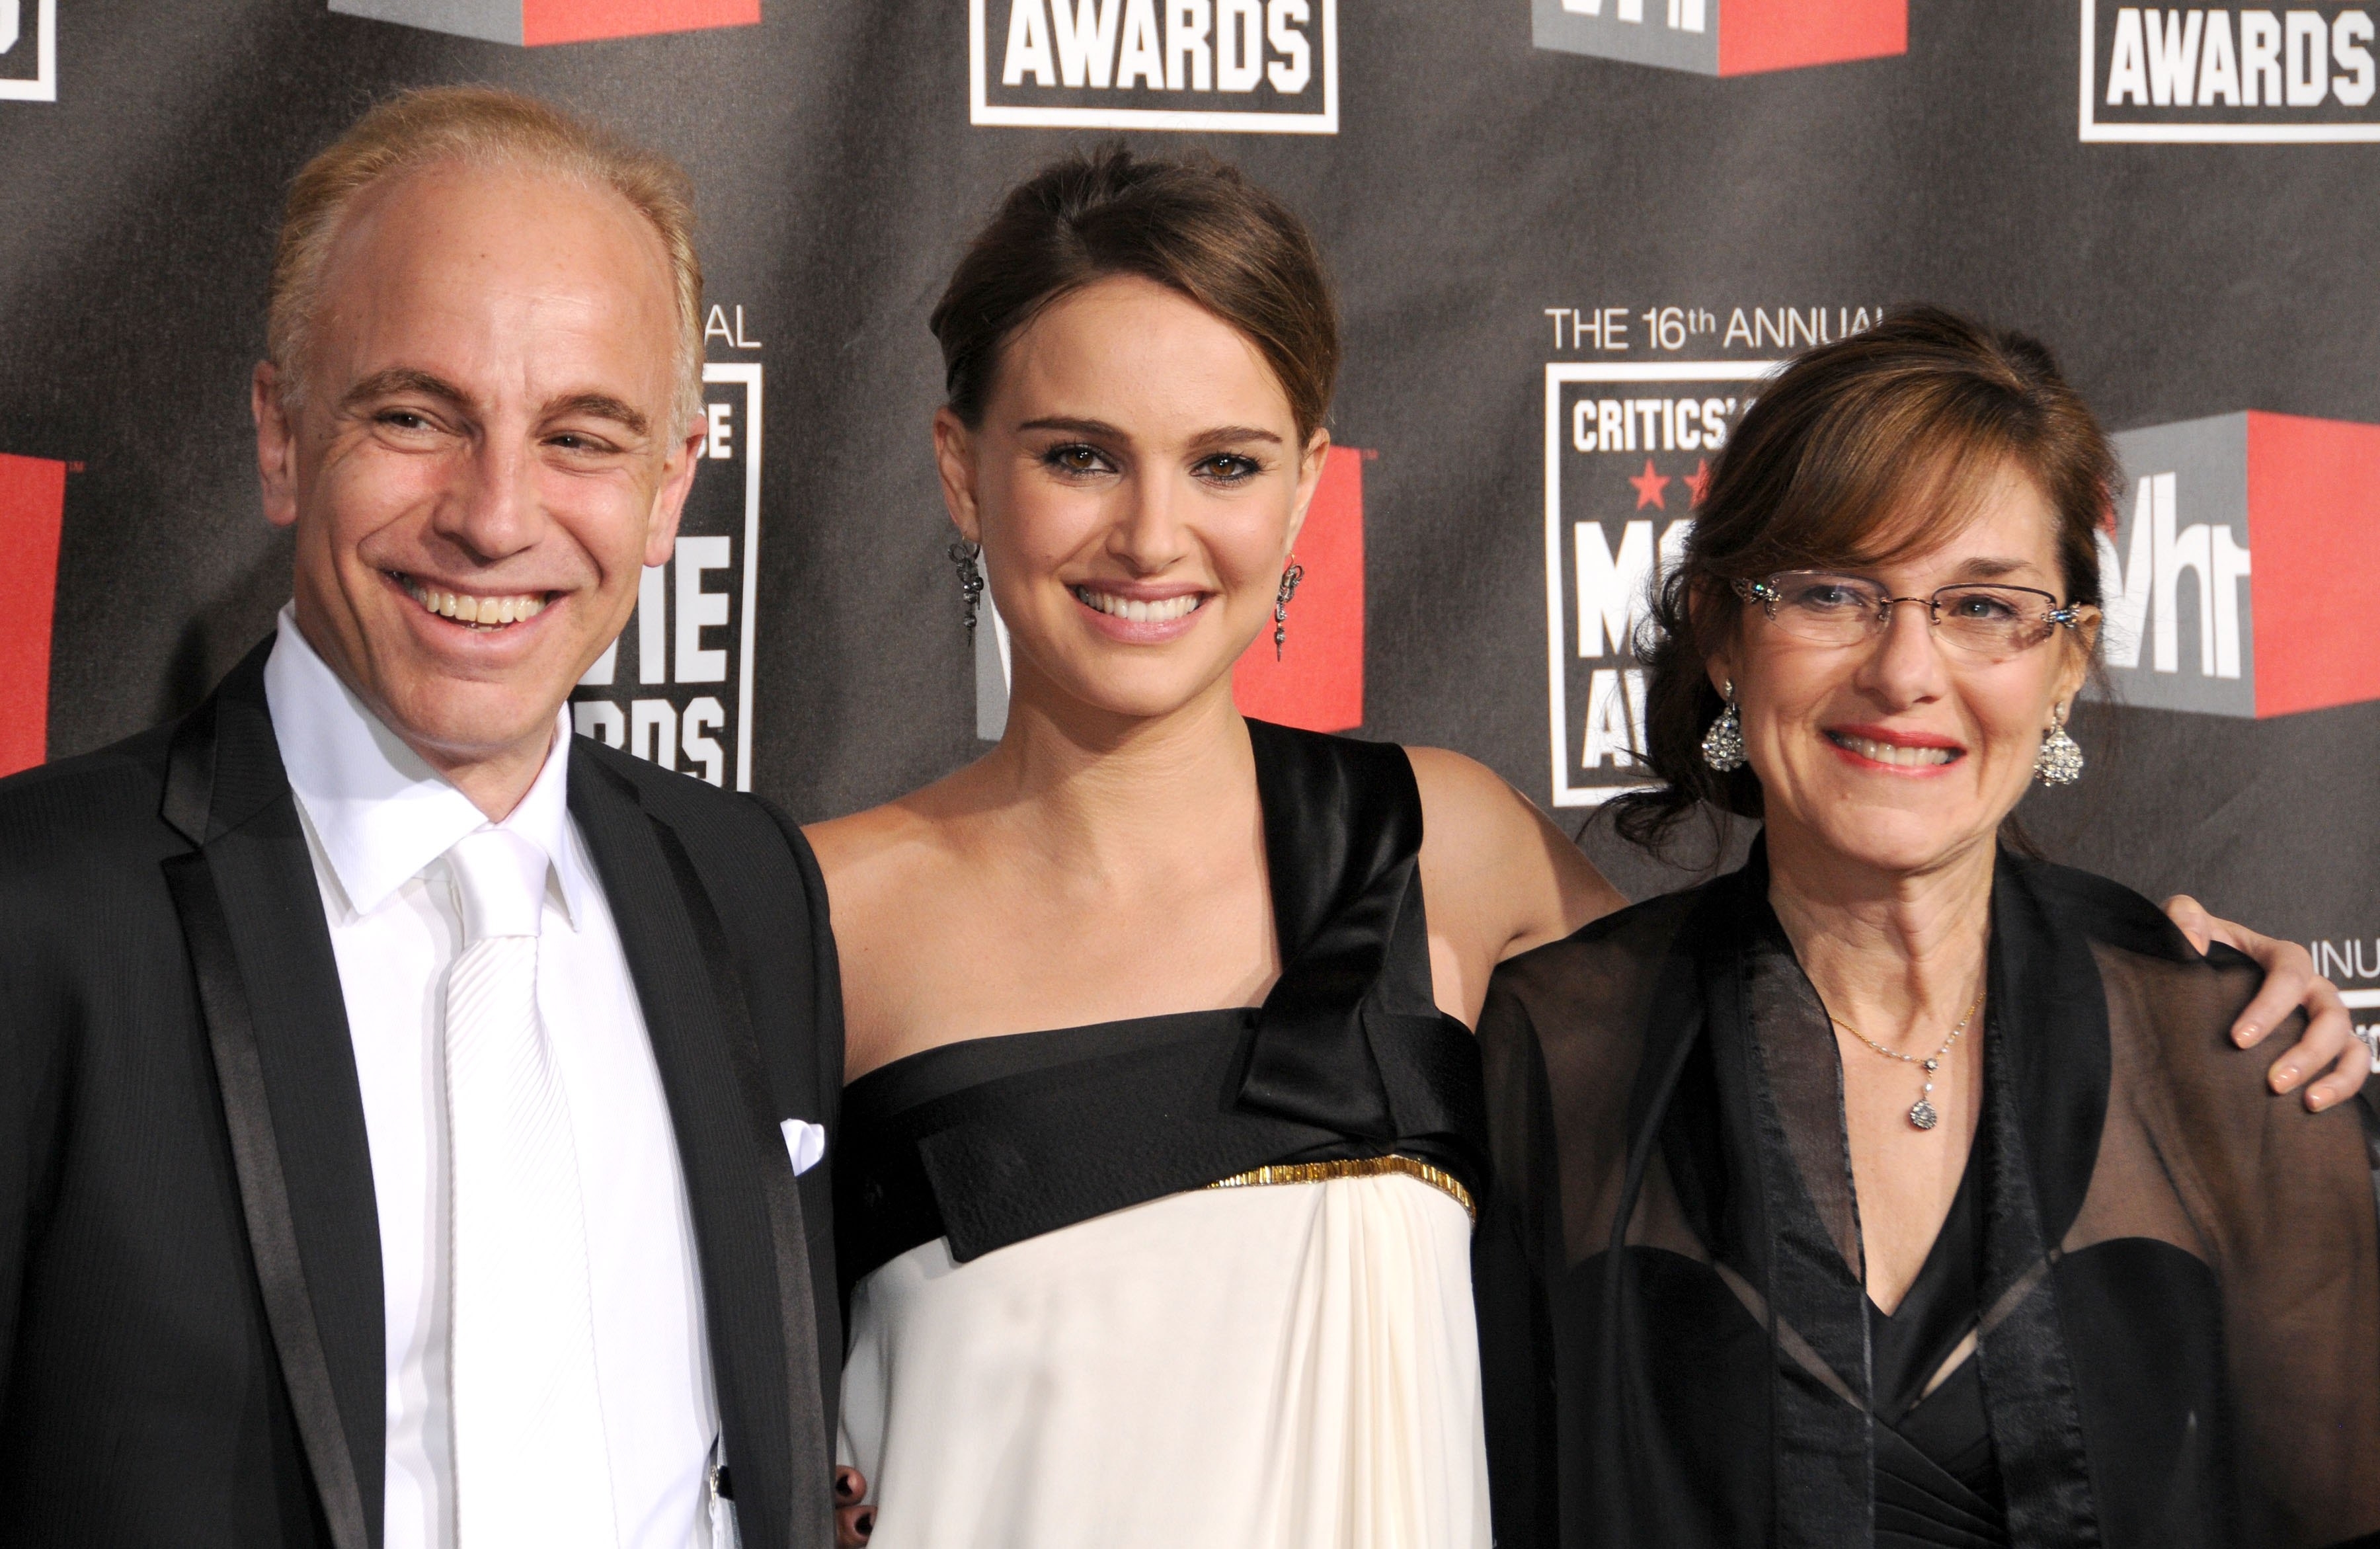 closeup of her and her parents at an awards event